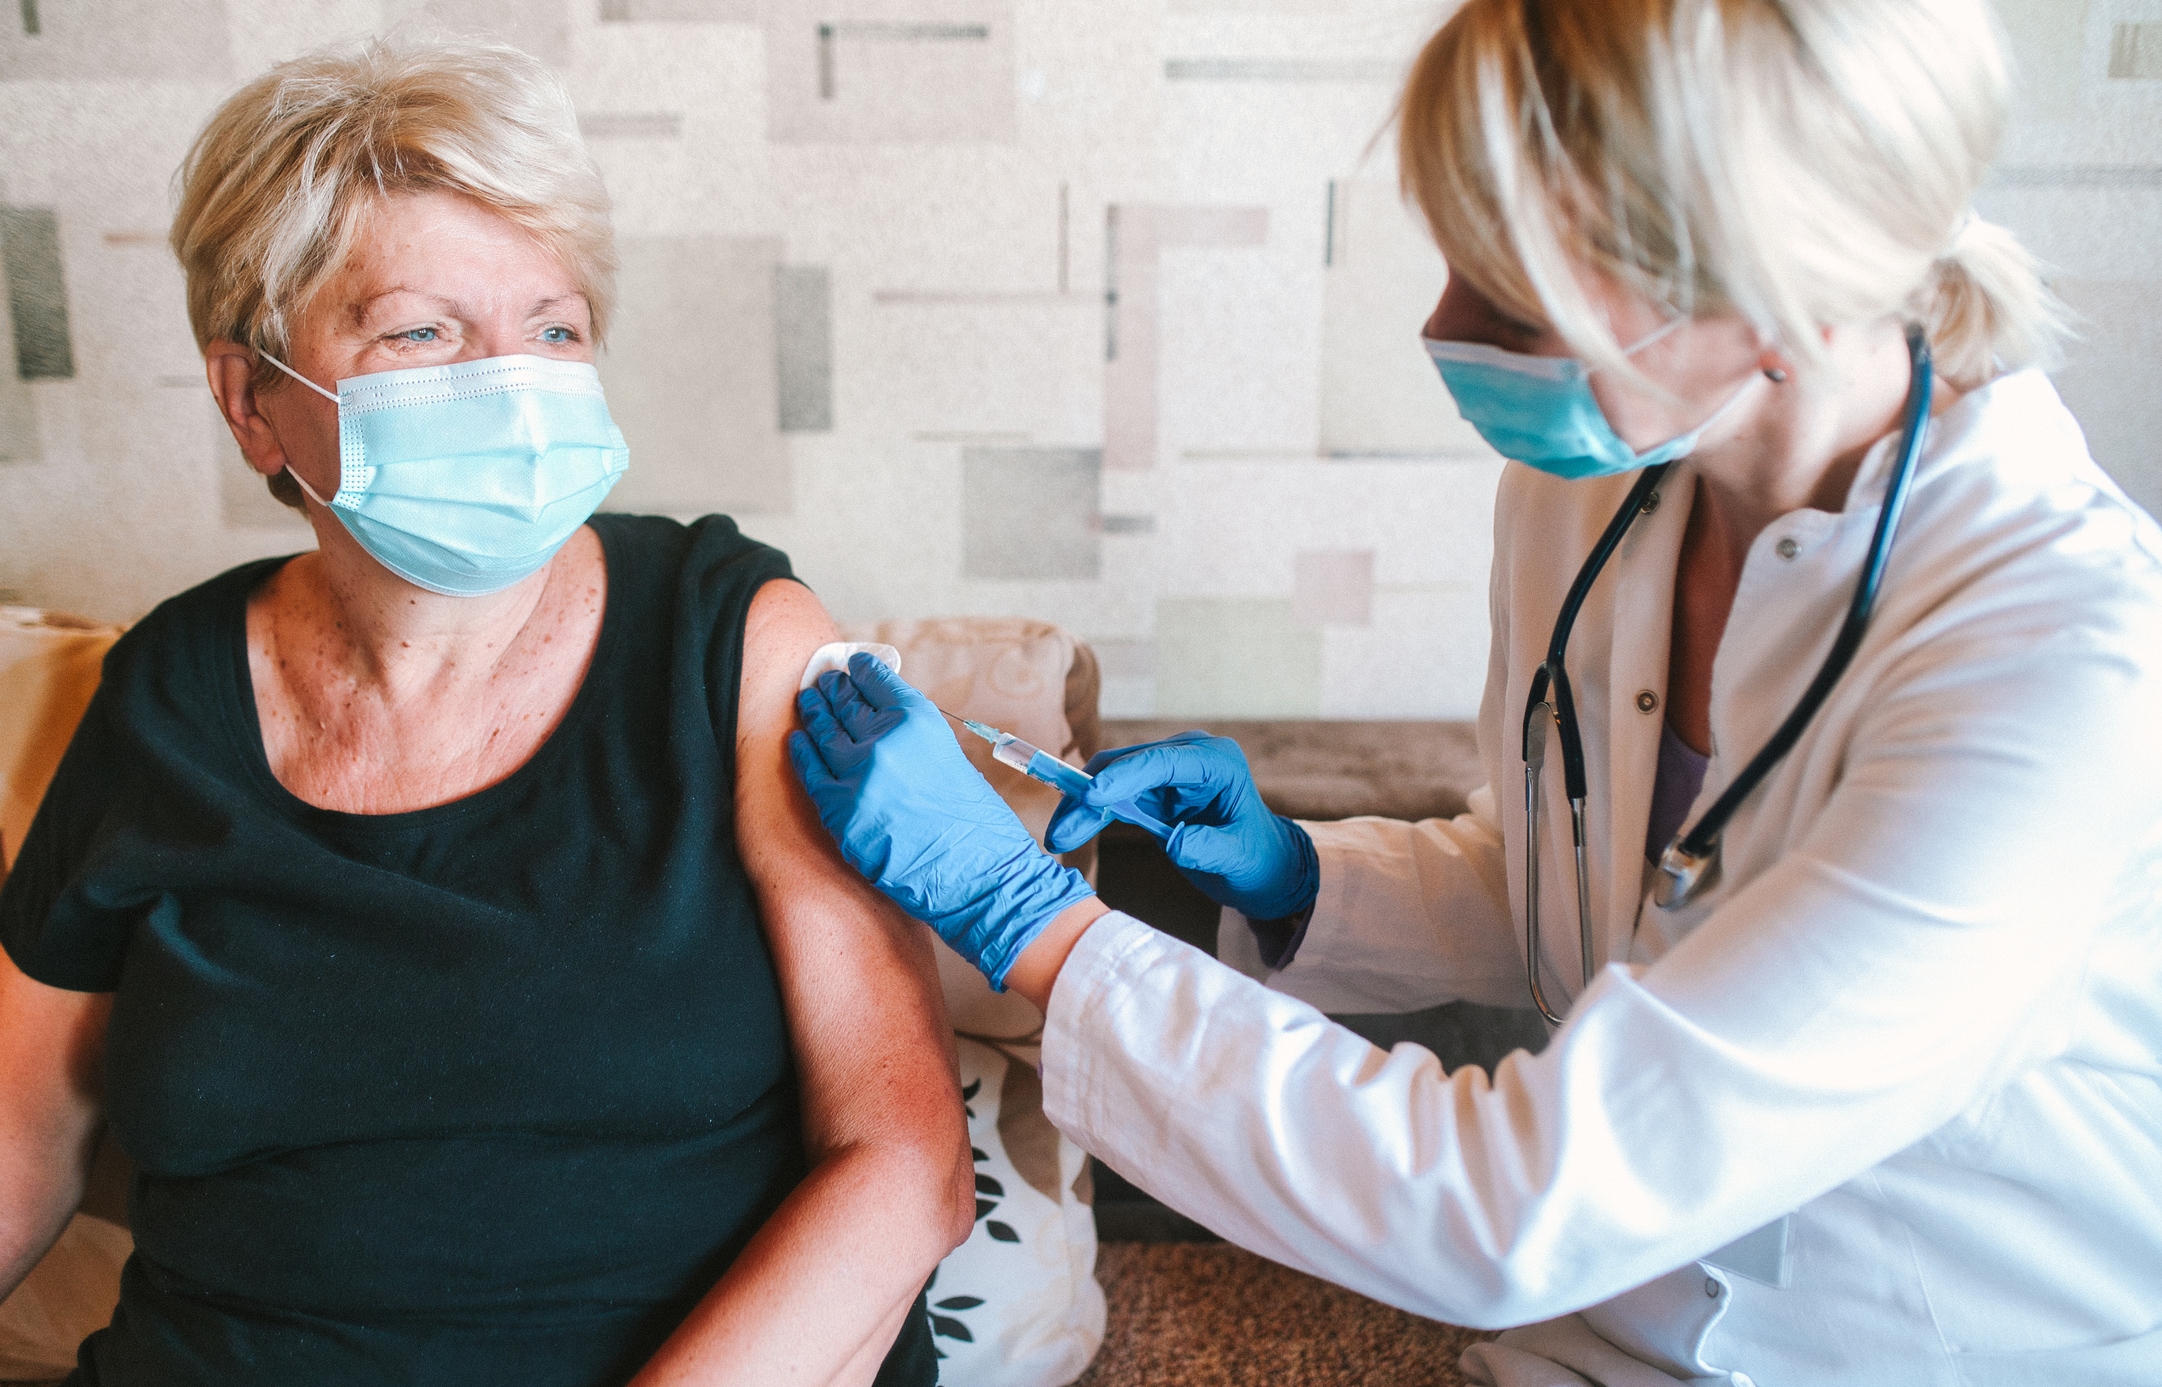 COVID-19 vaccination begins in long-term care facilities: What you need to know